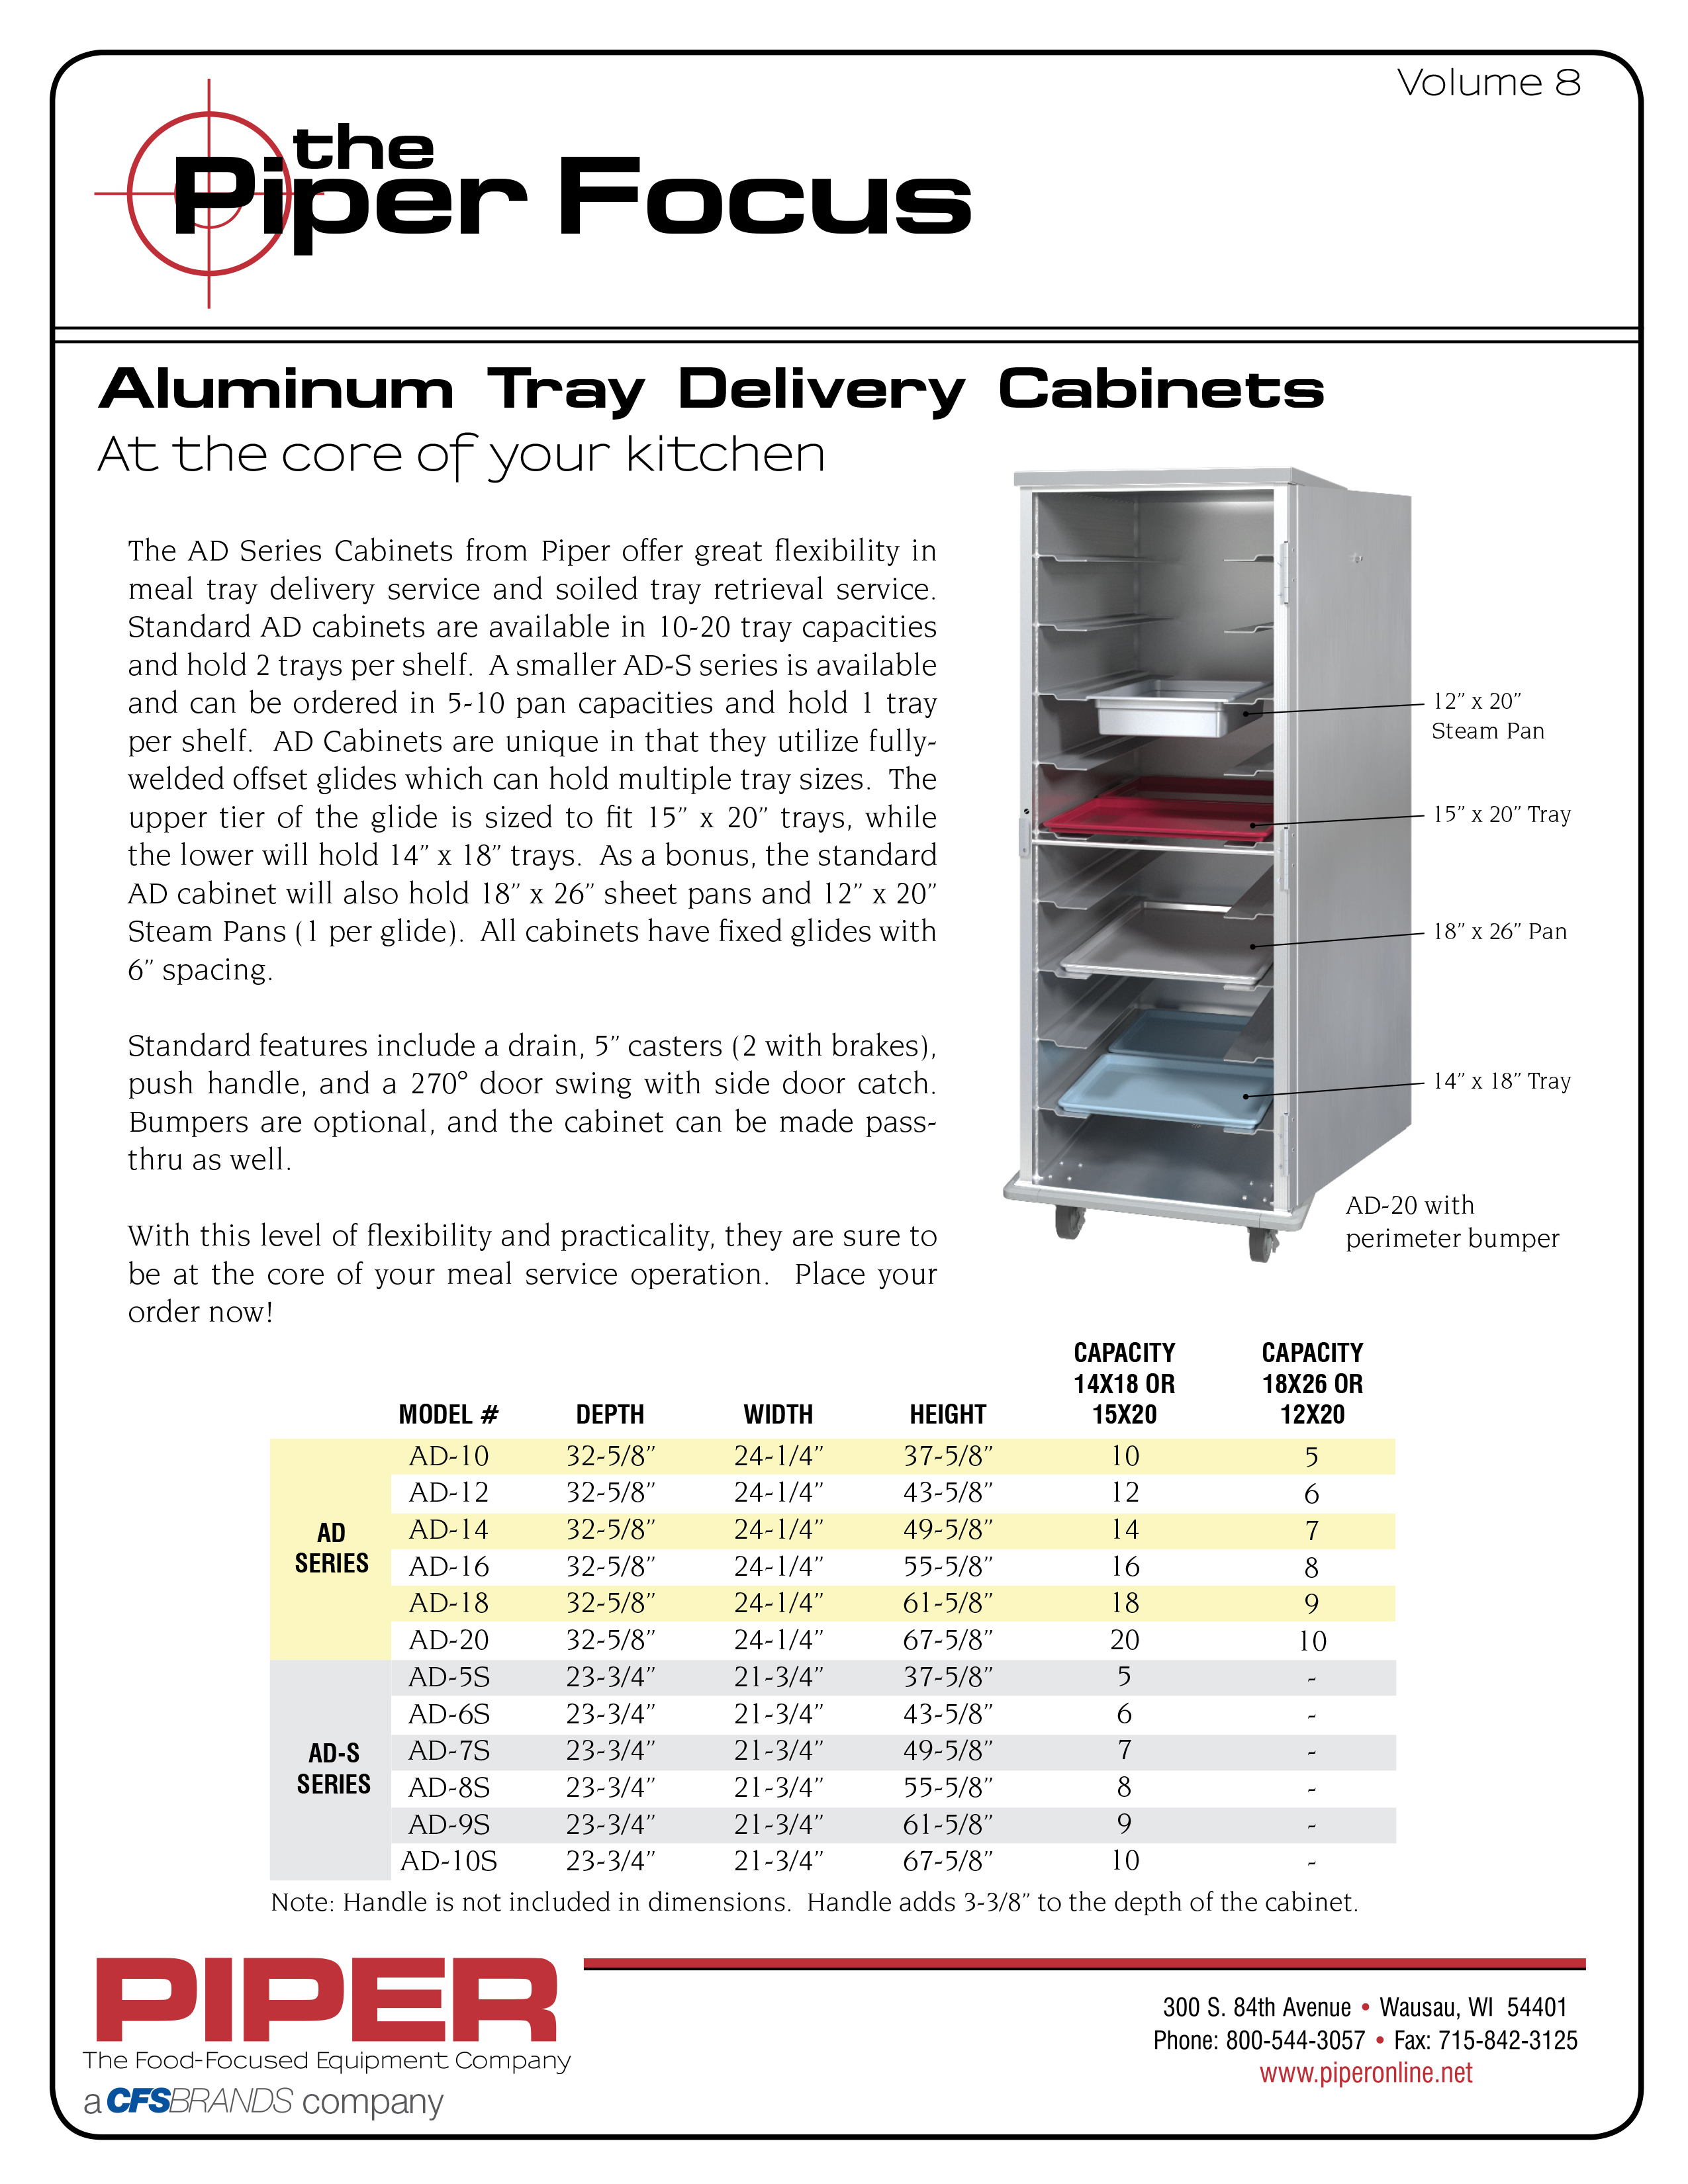 Aluminum Tray Delivery Cabinets